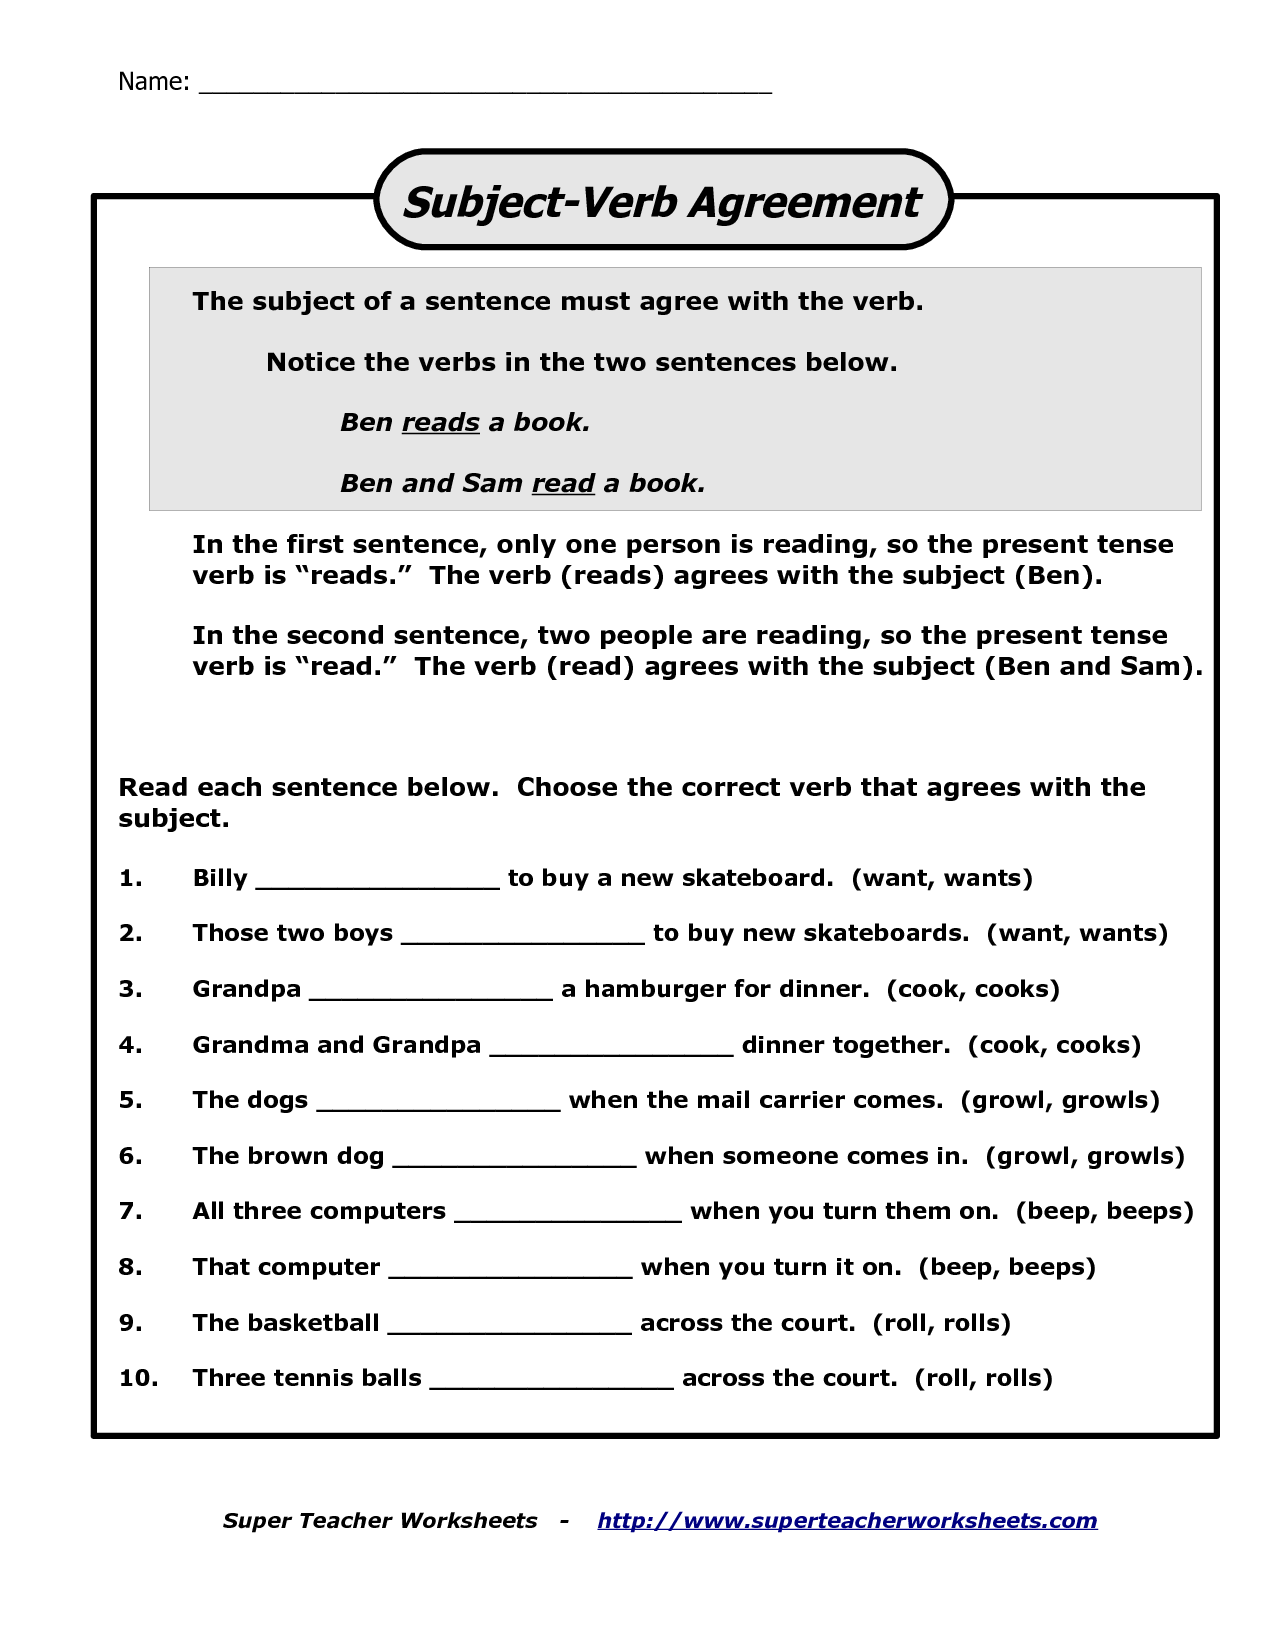 Buy Essays Online From Successful Essay subject verb agreement Research Paper 2017 10 06